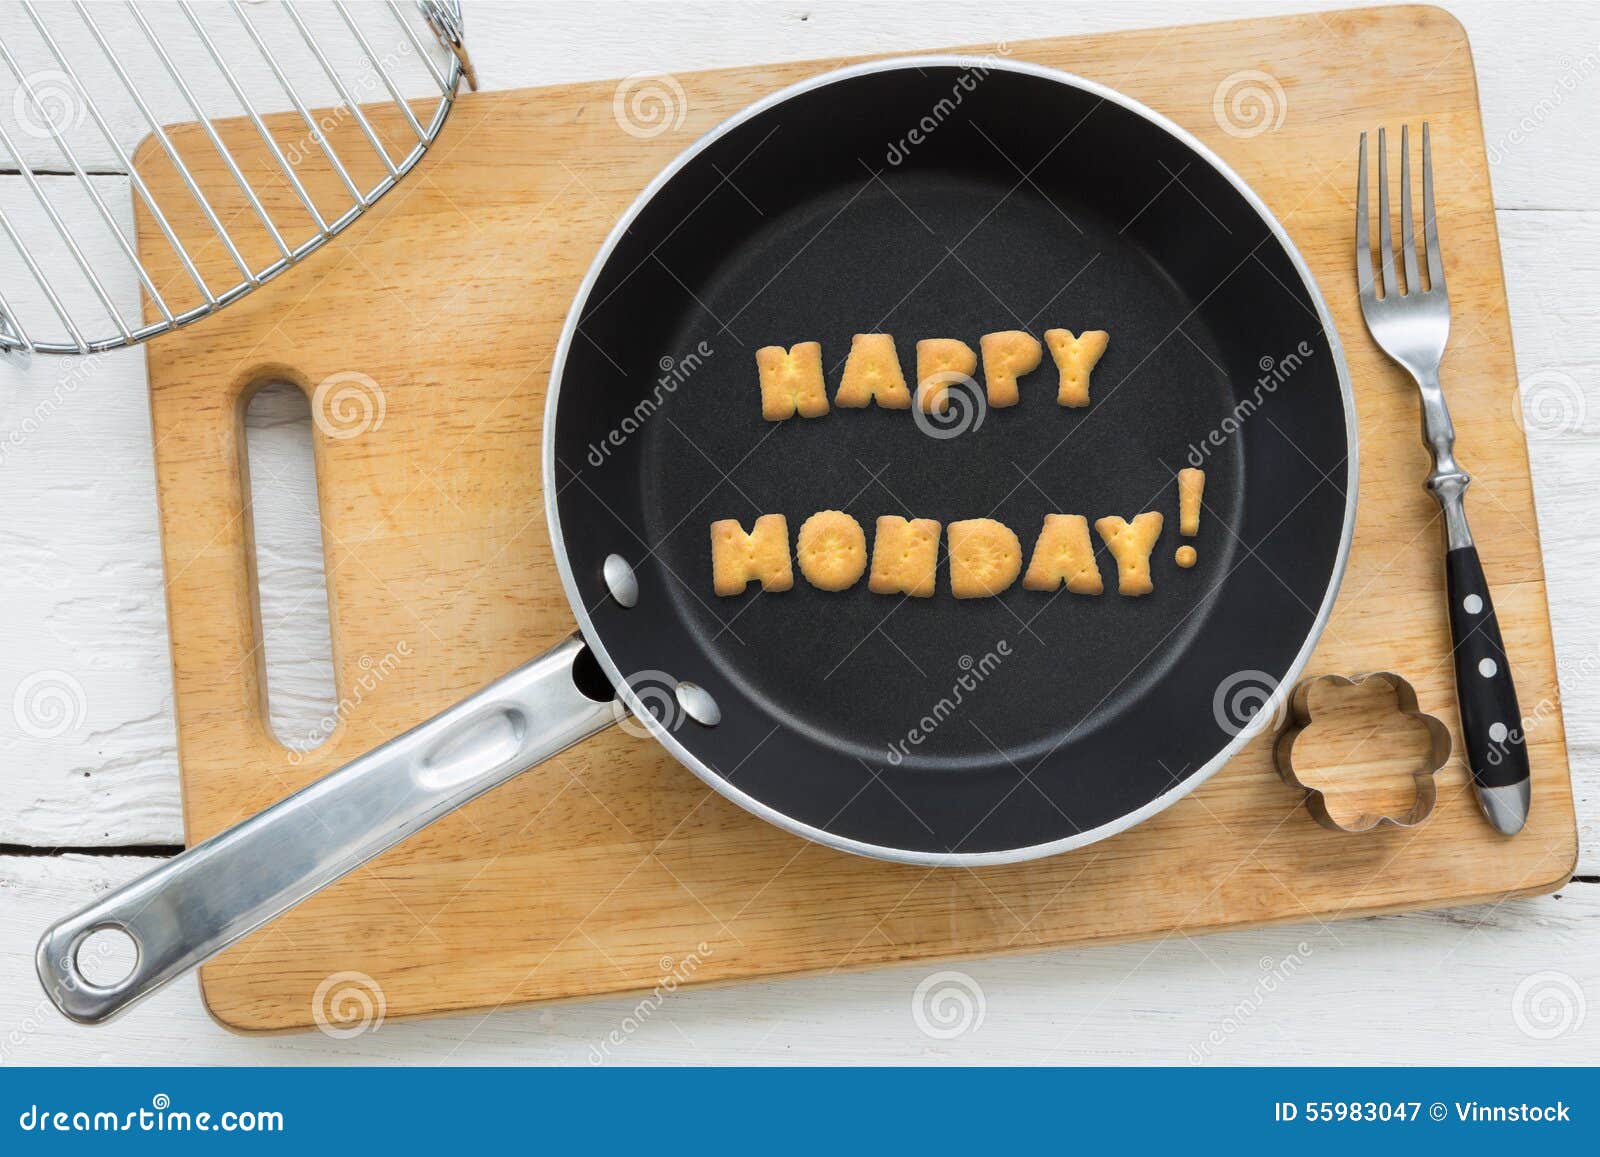 letter biscuits word happy monday and cooking equipments.